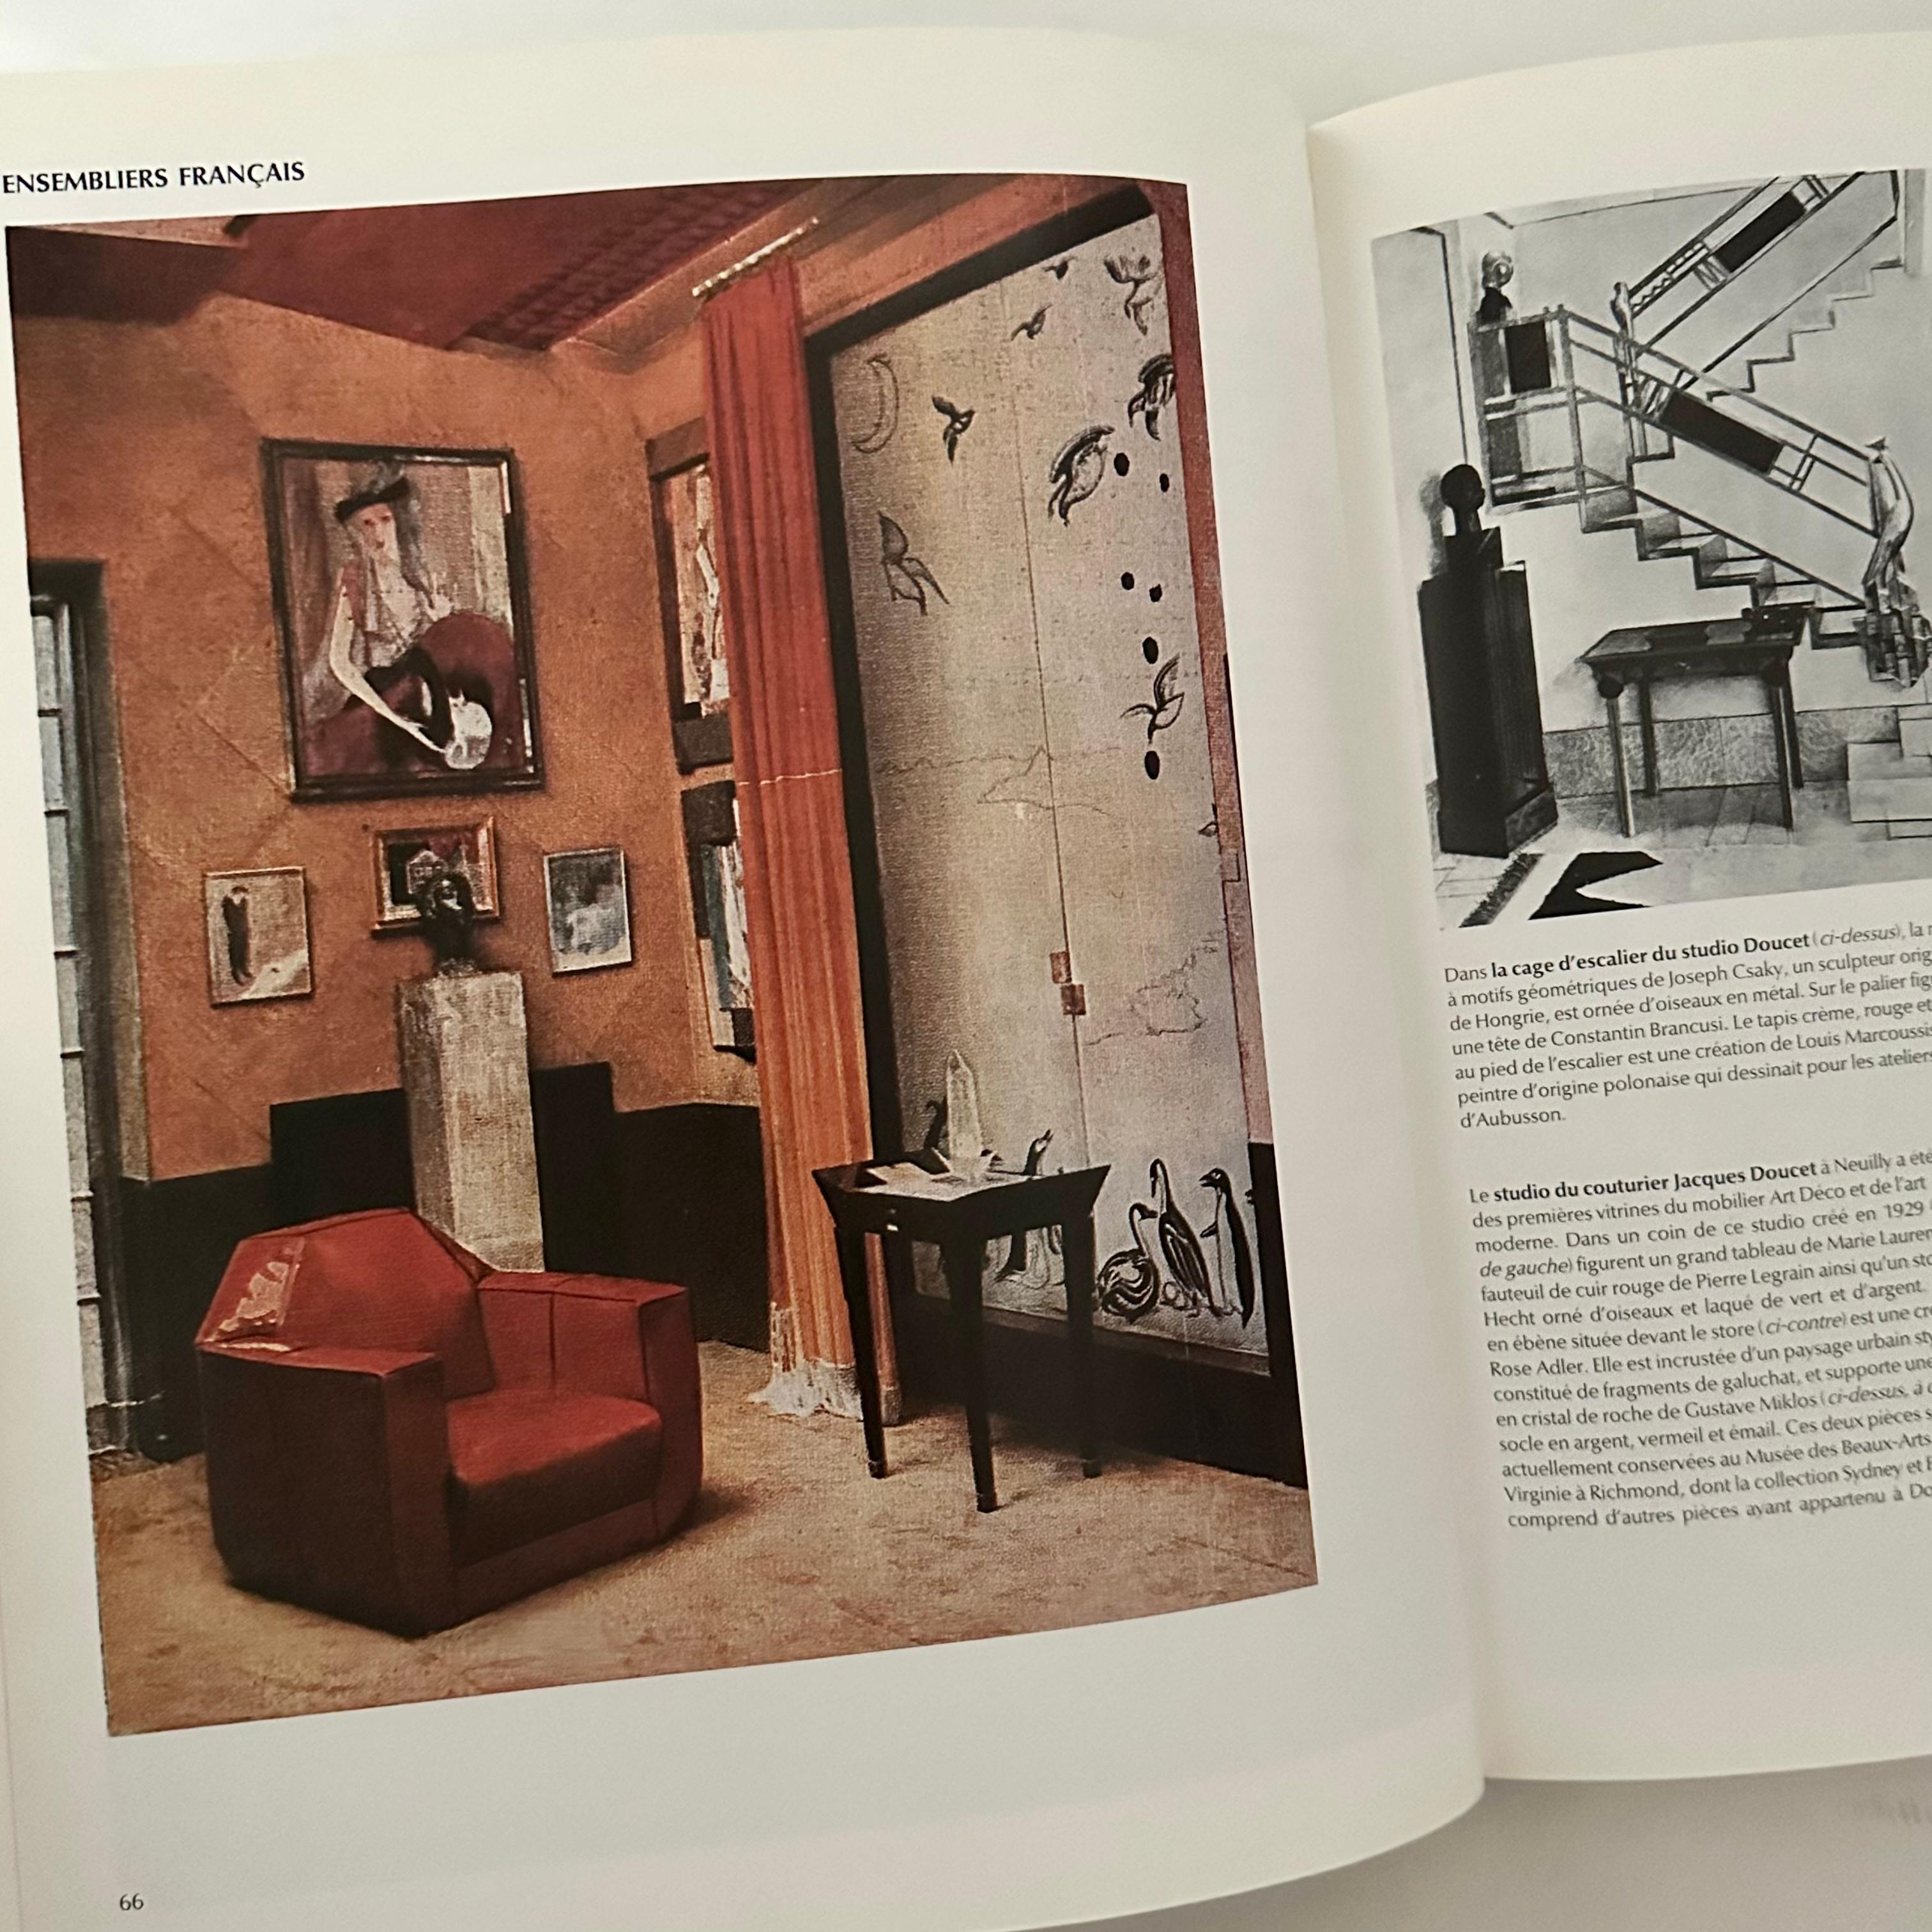 Published by Editions de L’Amateur, 1st edition, Paris, 1990. Hardback with French text.

This is a beautiful book with more than 300 illustrations, out of which 151 vibrant colour plates showcase the widespread influence of Art Deco on all interior